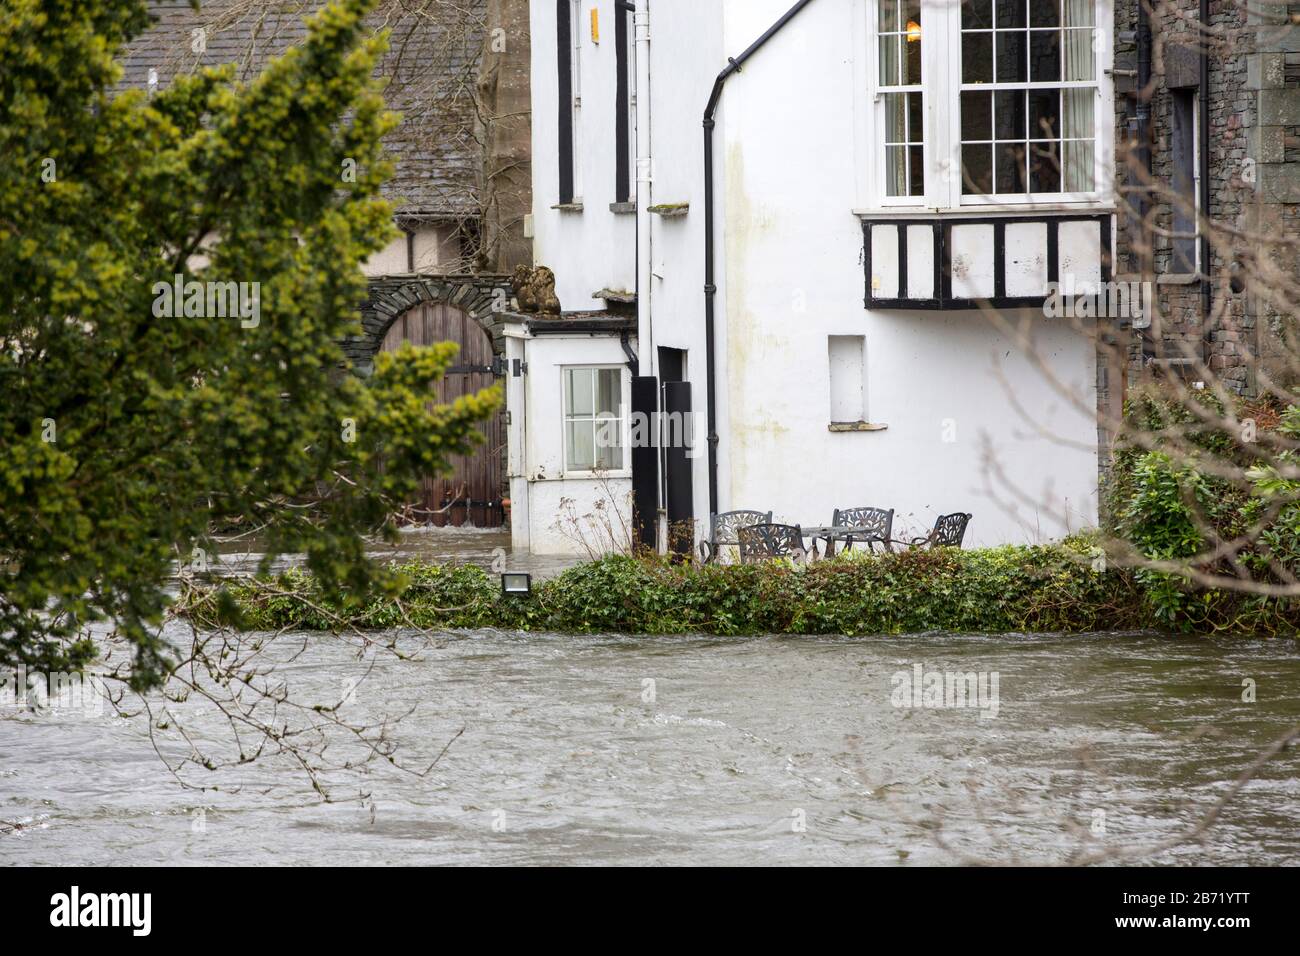 Flooding caused by Storm Ciara at Rothay Bridge in Ambleside, Lake District, UK, with an flooded house. Stock Photo